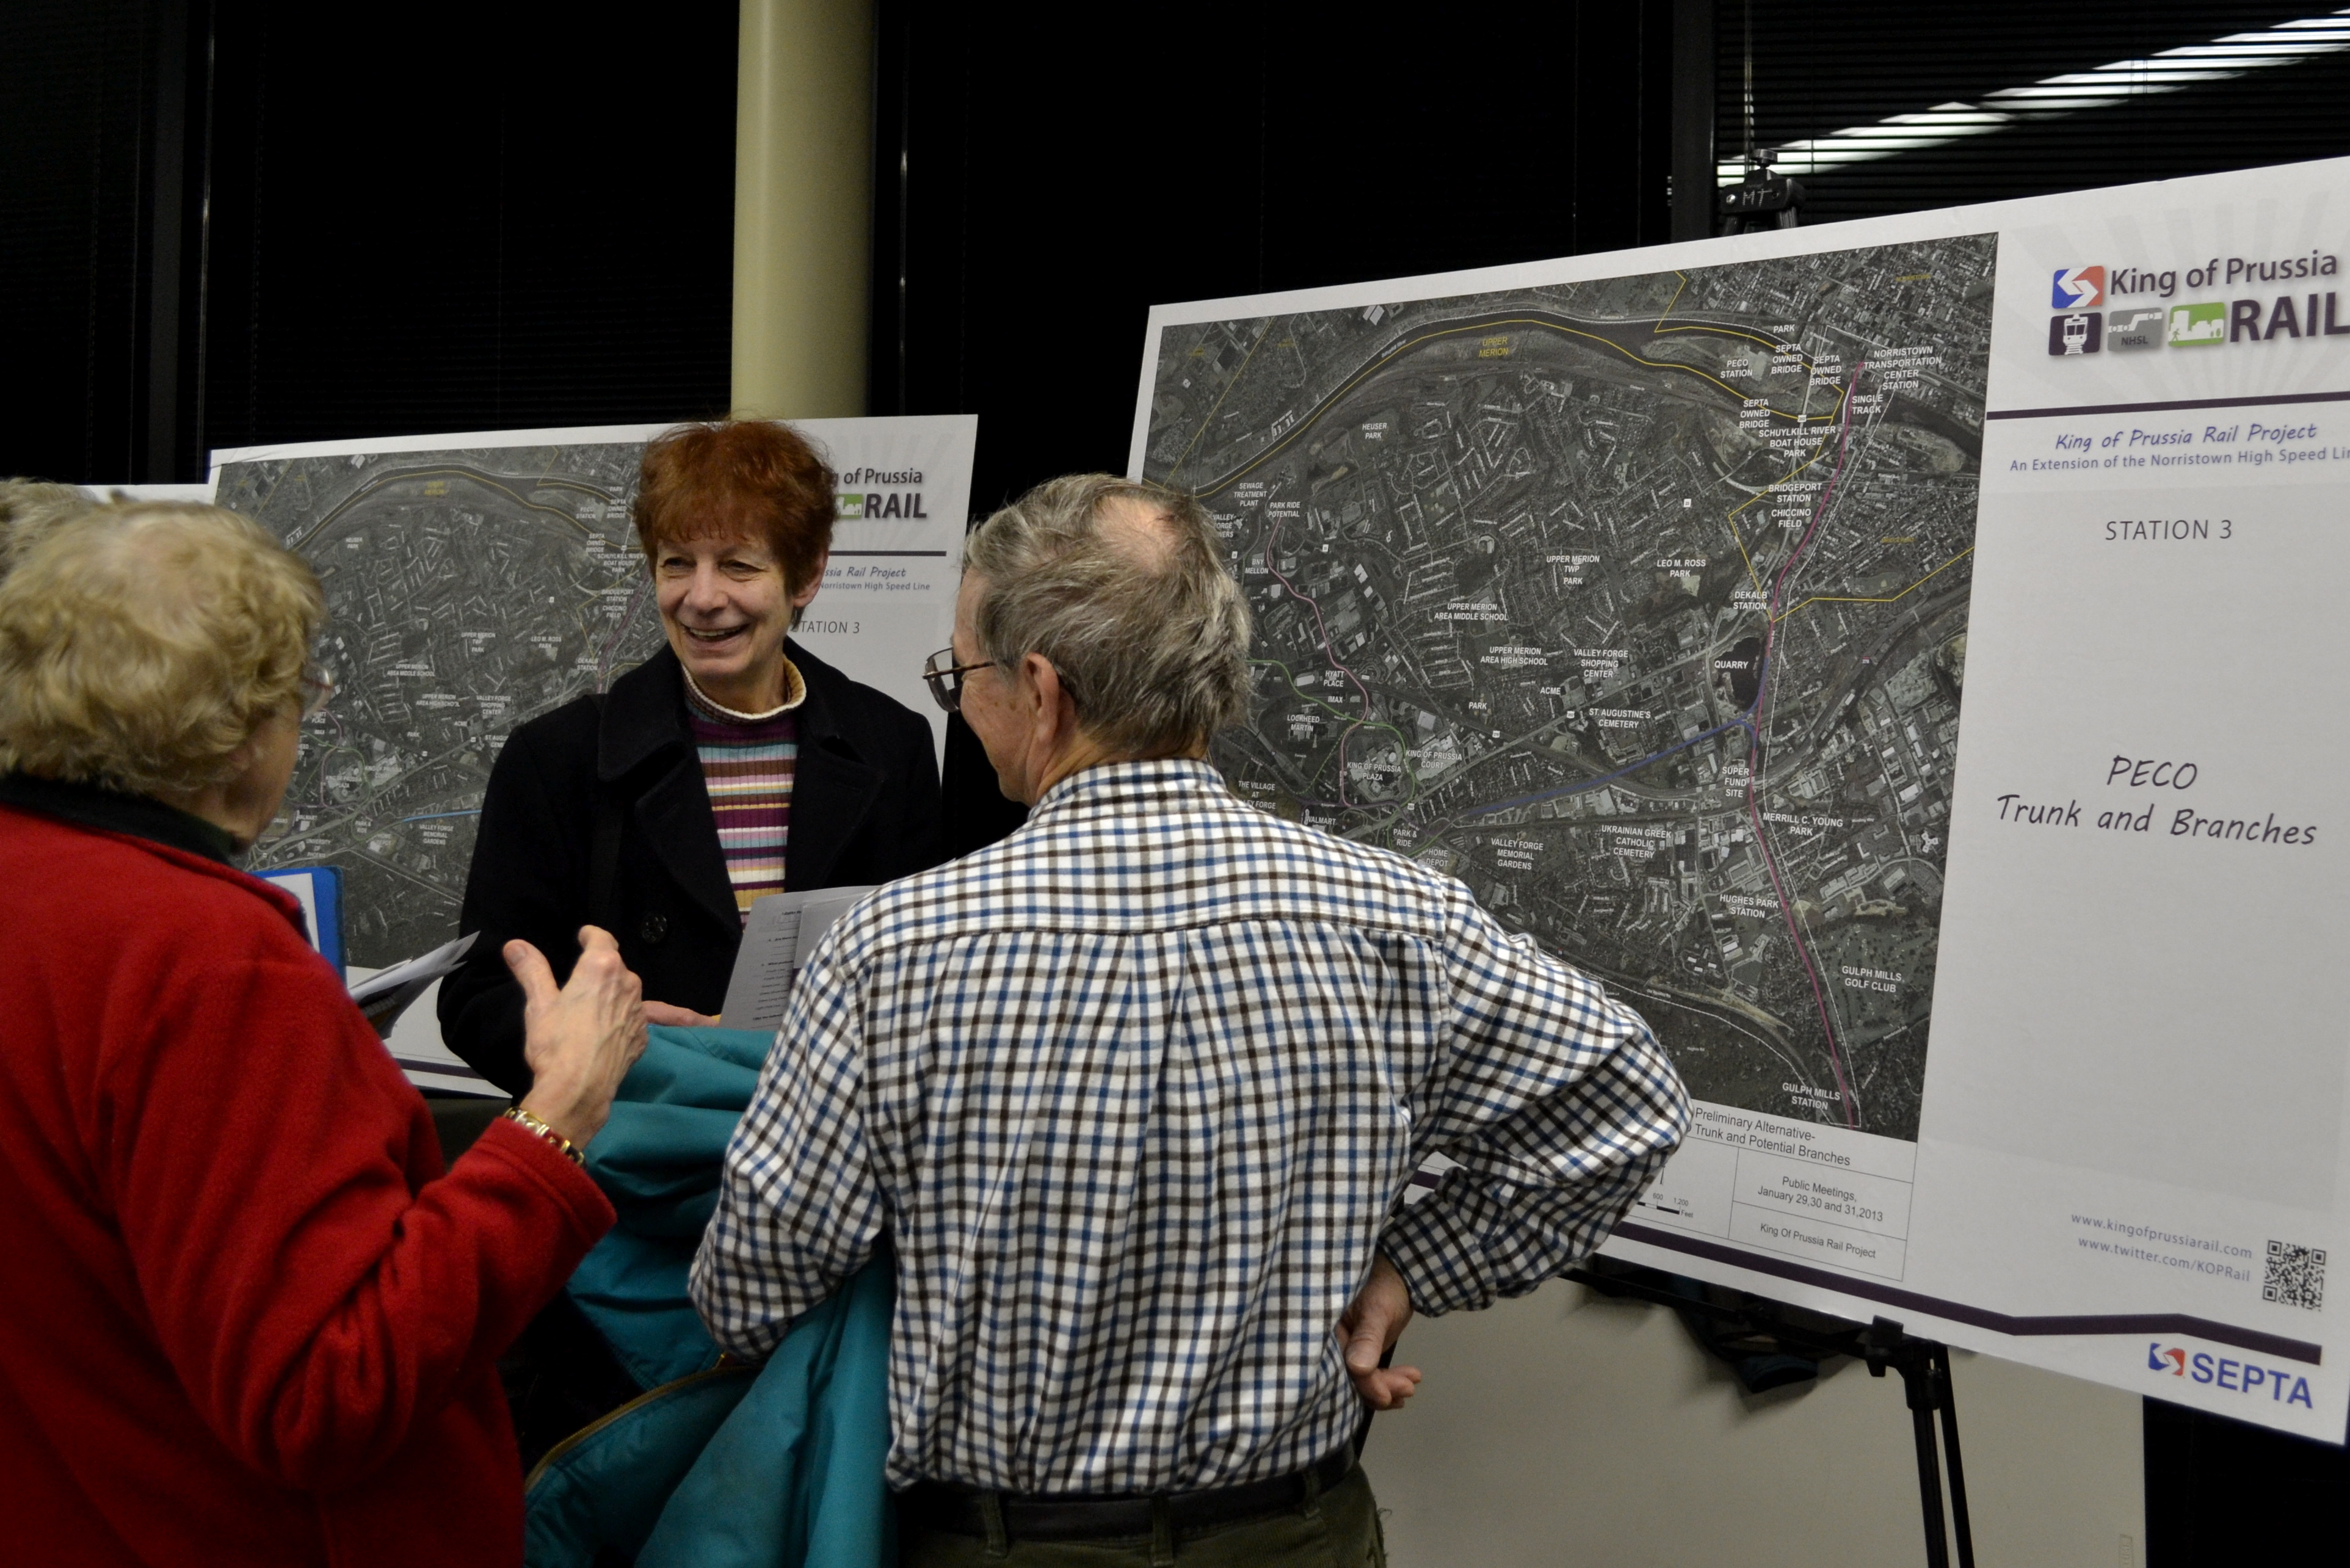 King of Prussia Rail Project public meeting